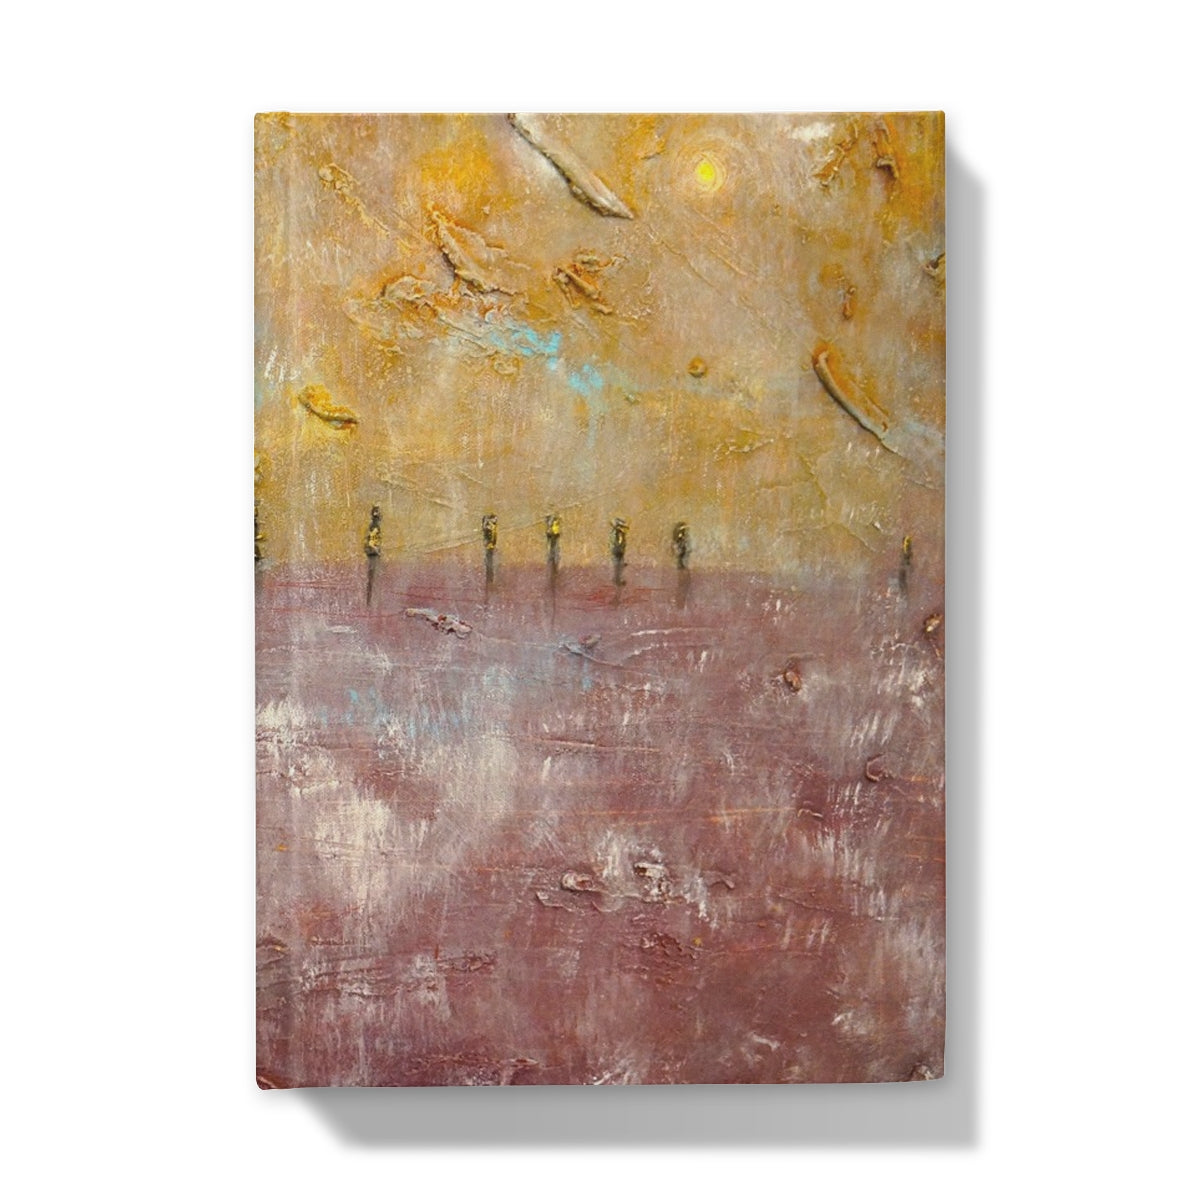 Bordgar Mist Orkney Art Gifts Hardback Journal-Journals & Notebooks-Orkney Art Gallery-A5-Lined-Paintings, Prints, Homeware, Art Gifts From Scotland By Scottish Artist Kevin Hunter